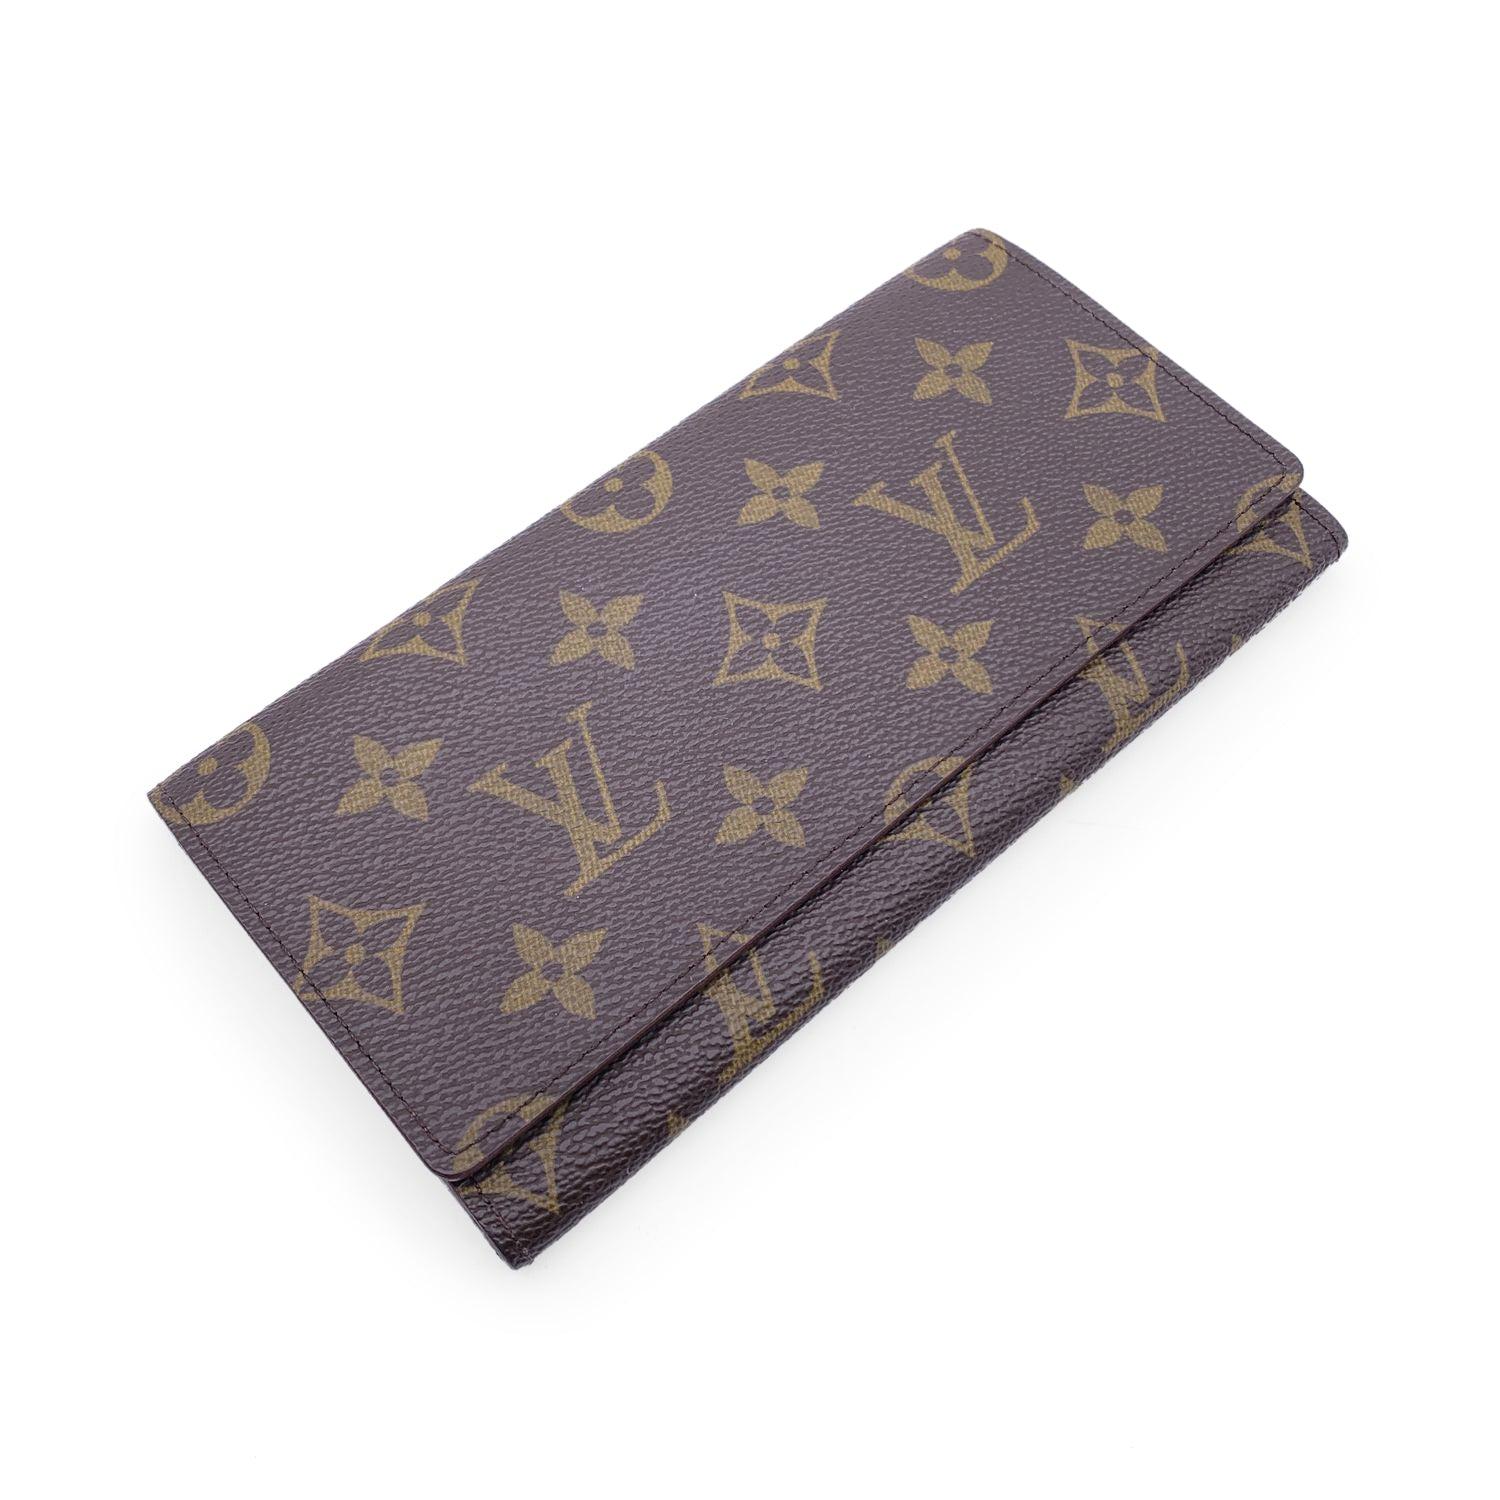 Vintage Louis Vuitton brown monogram canvas Long Bill Wallet. Flap closure. Leather lining. 1 main compartments inside. 3 small open pockets inside. 1 open pocket under the flap. 'LOUIS VUITTON Paris - made in Spain' engraved inside. Authenticity